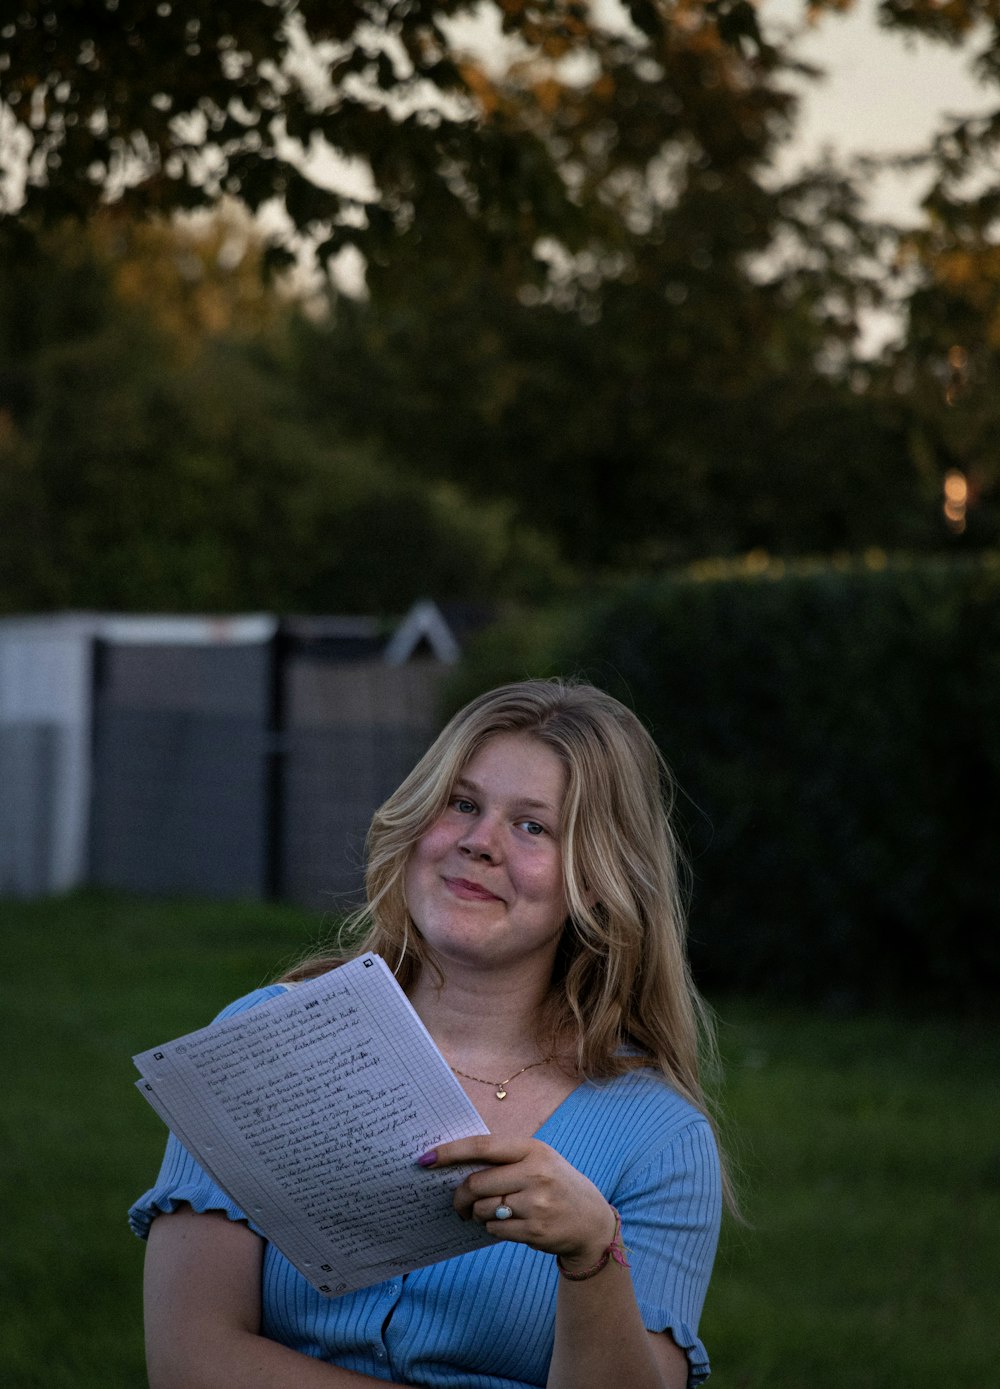 a woman in a blue shirt is holding a book